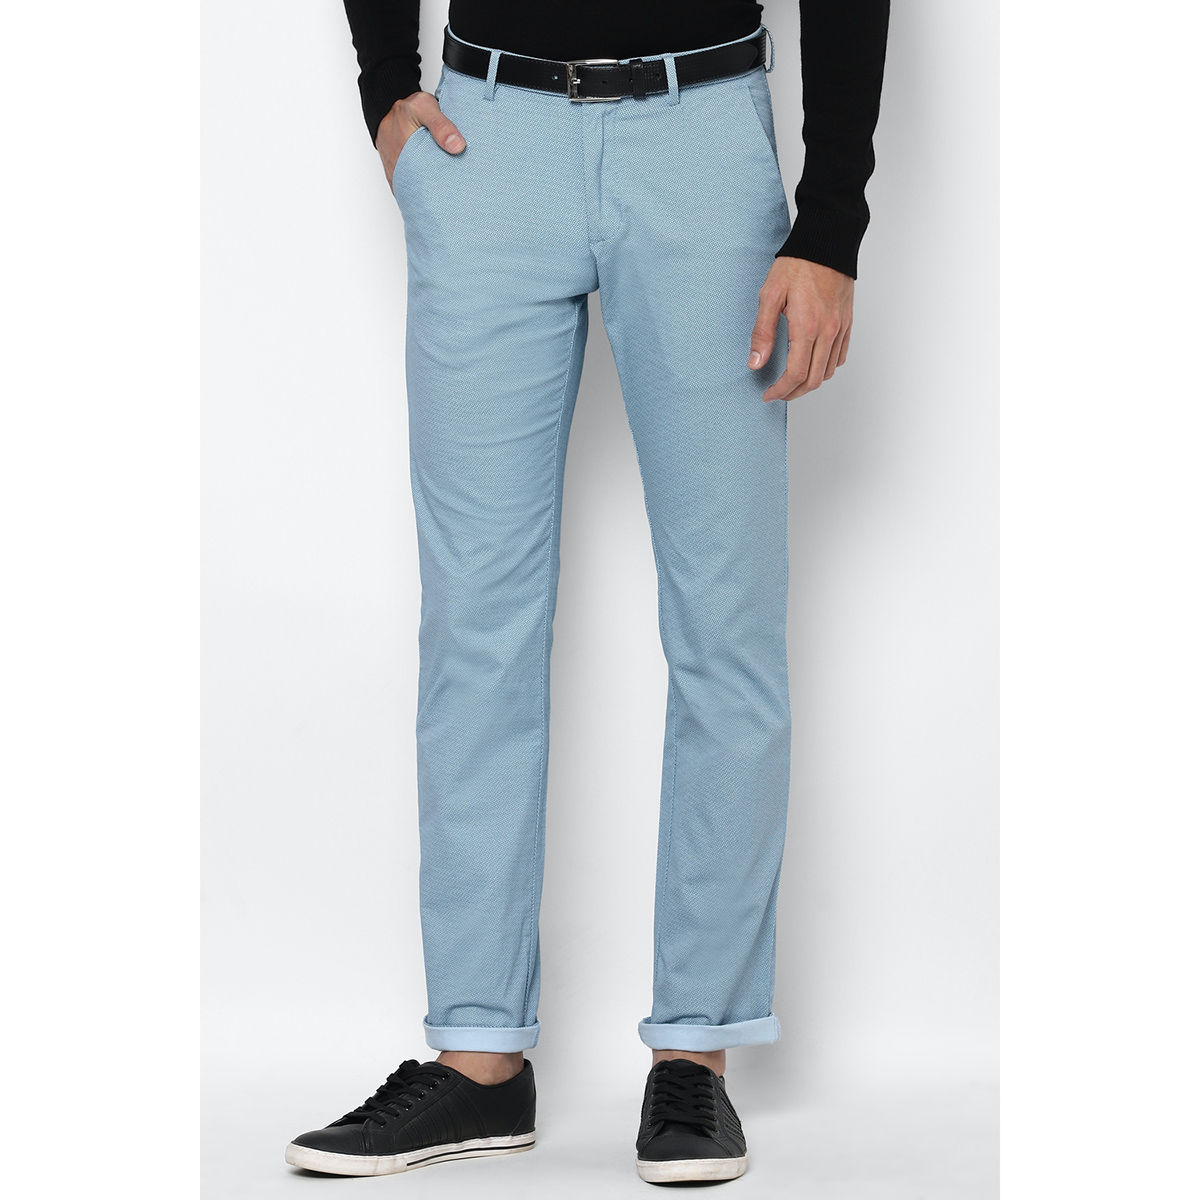 Allen Solly Trousers outlet  Men  1800 products on sale  FASHIOLAcouk